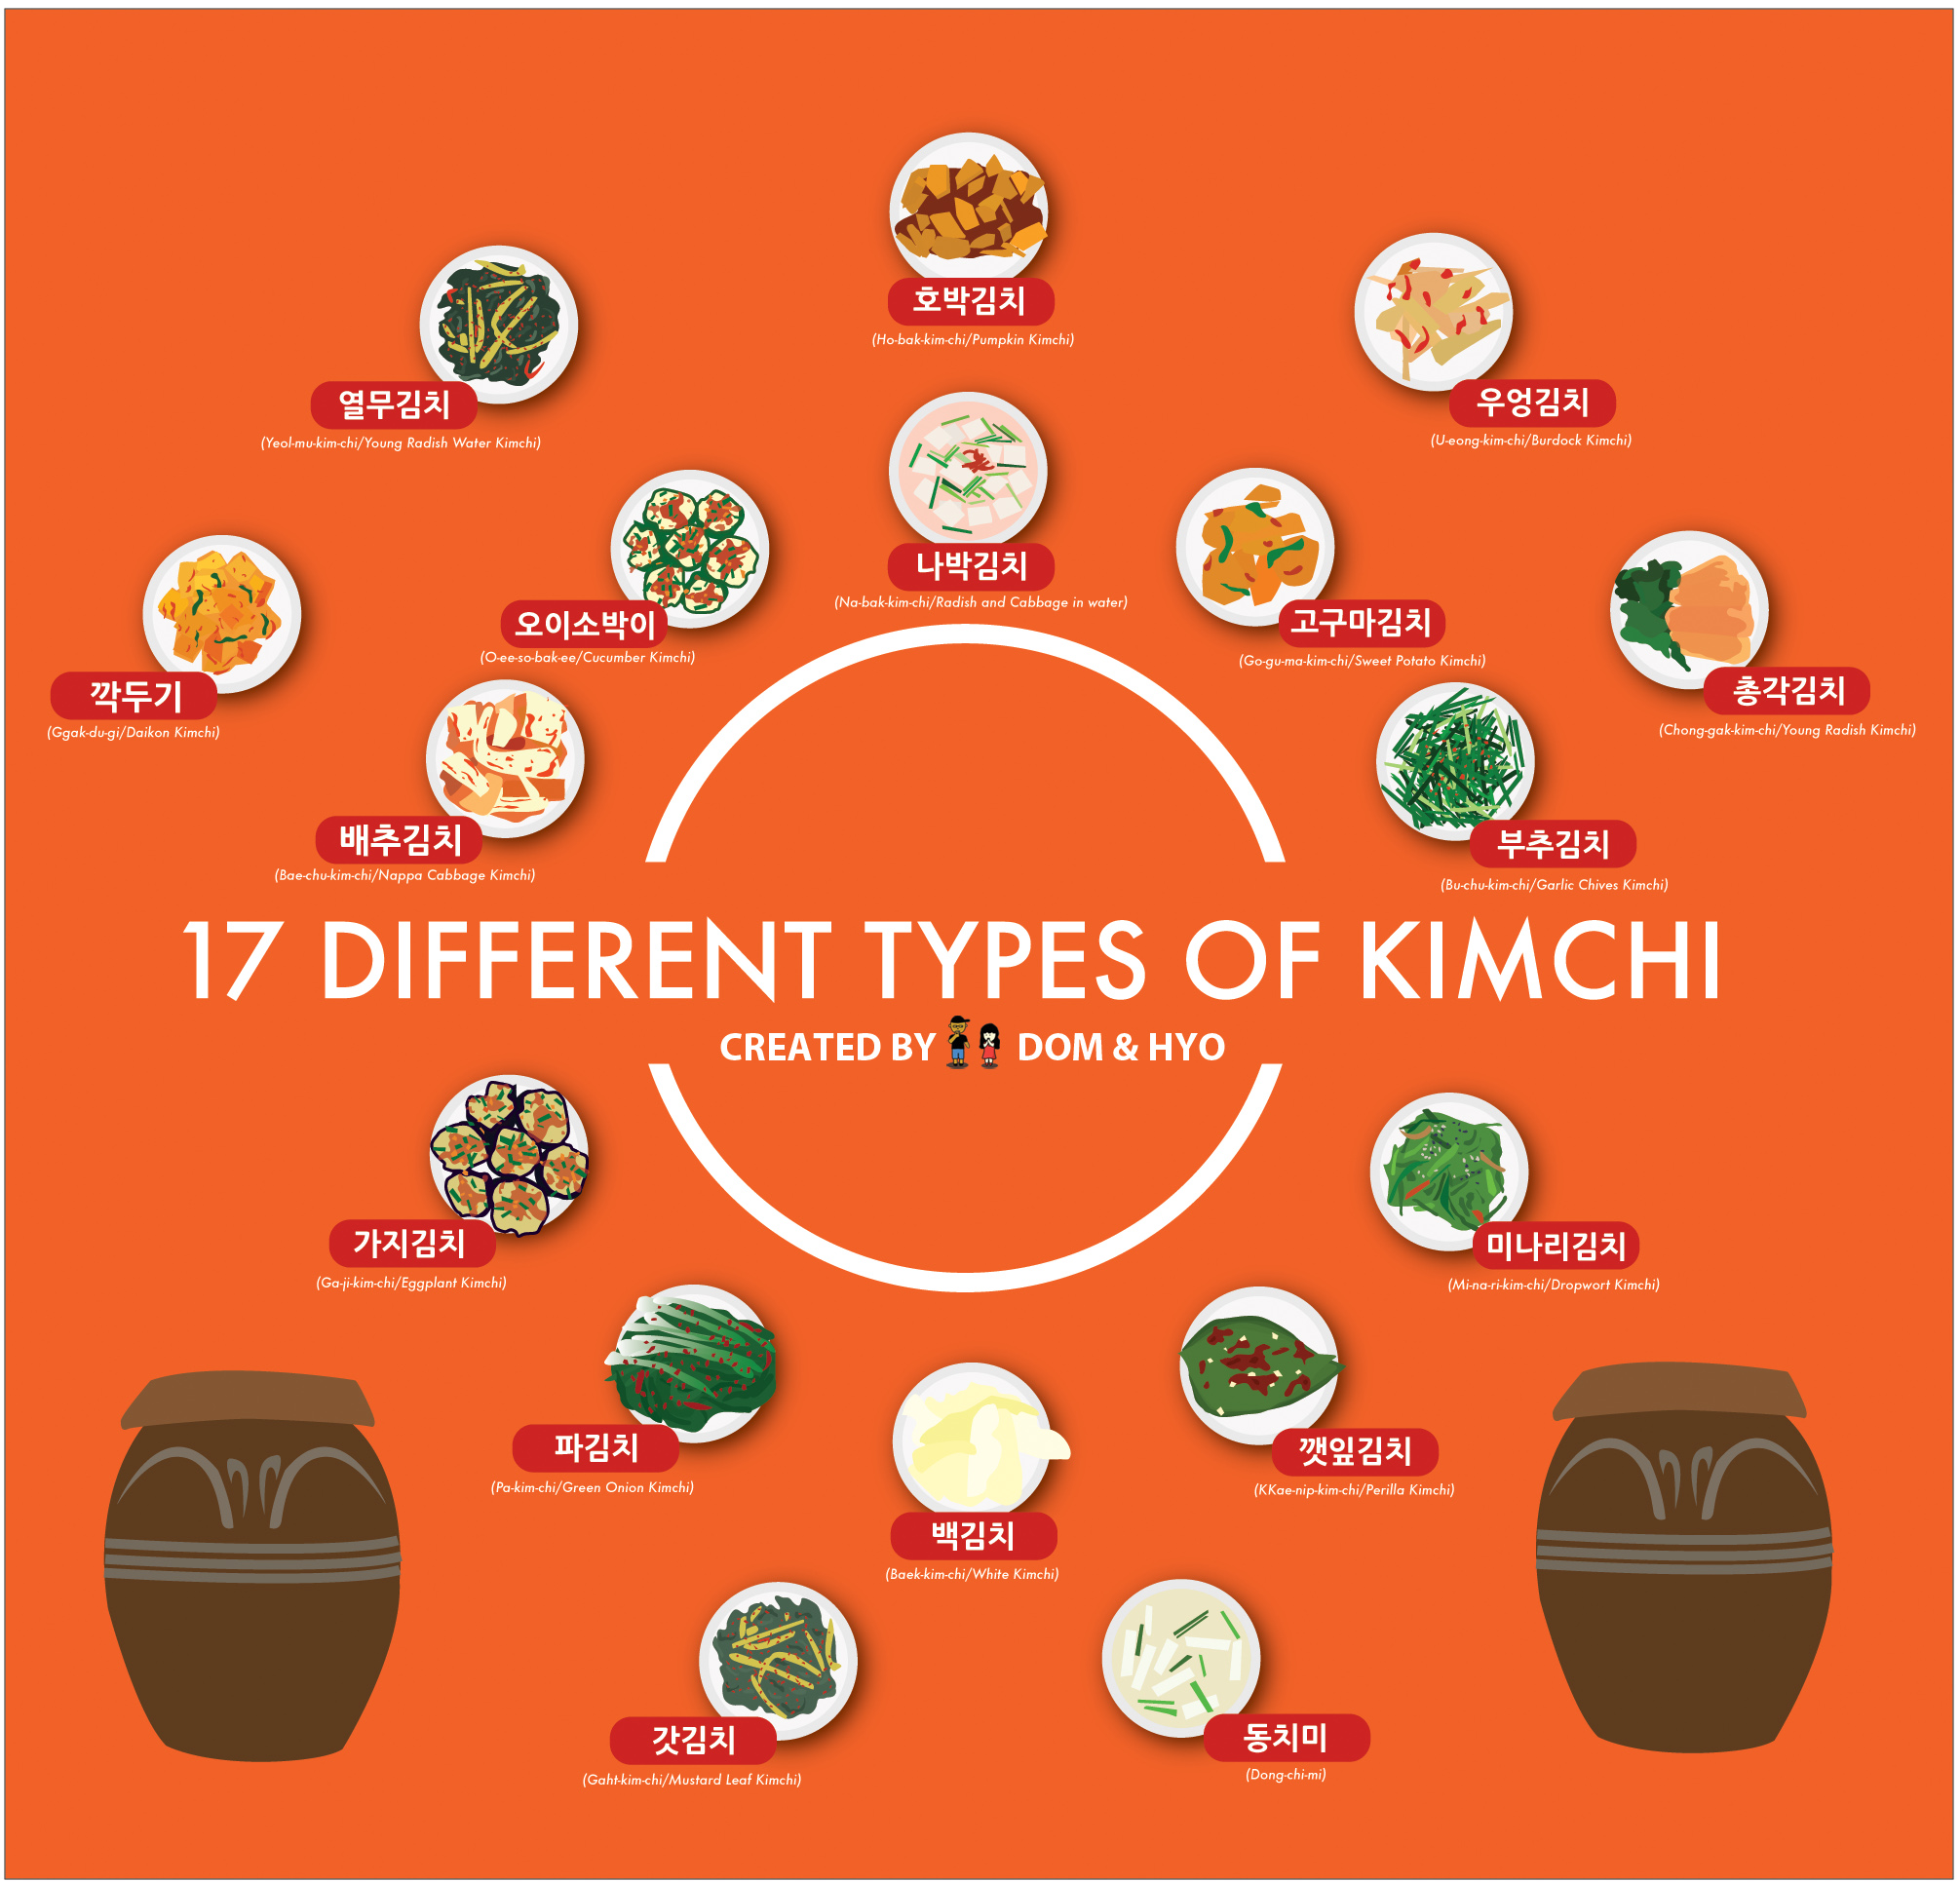 17 Different Types of Kimchi Infographic | Learn Korean with Fun